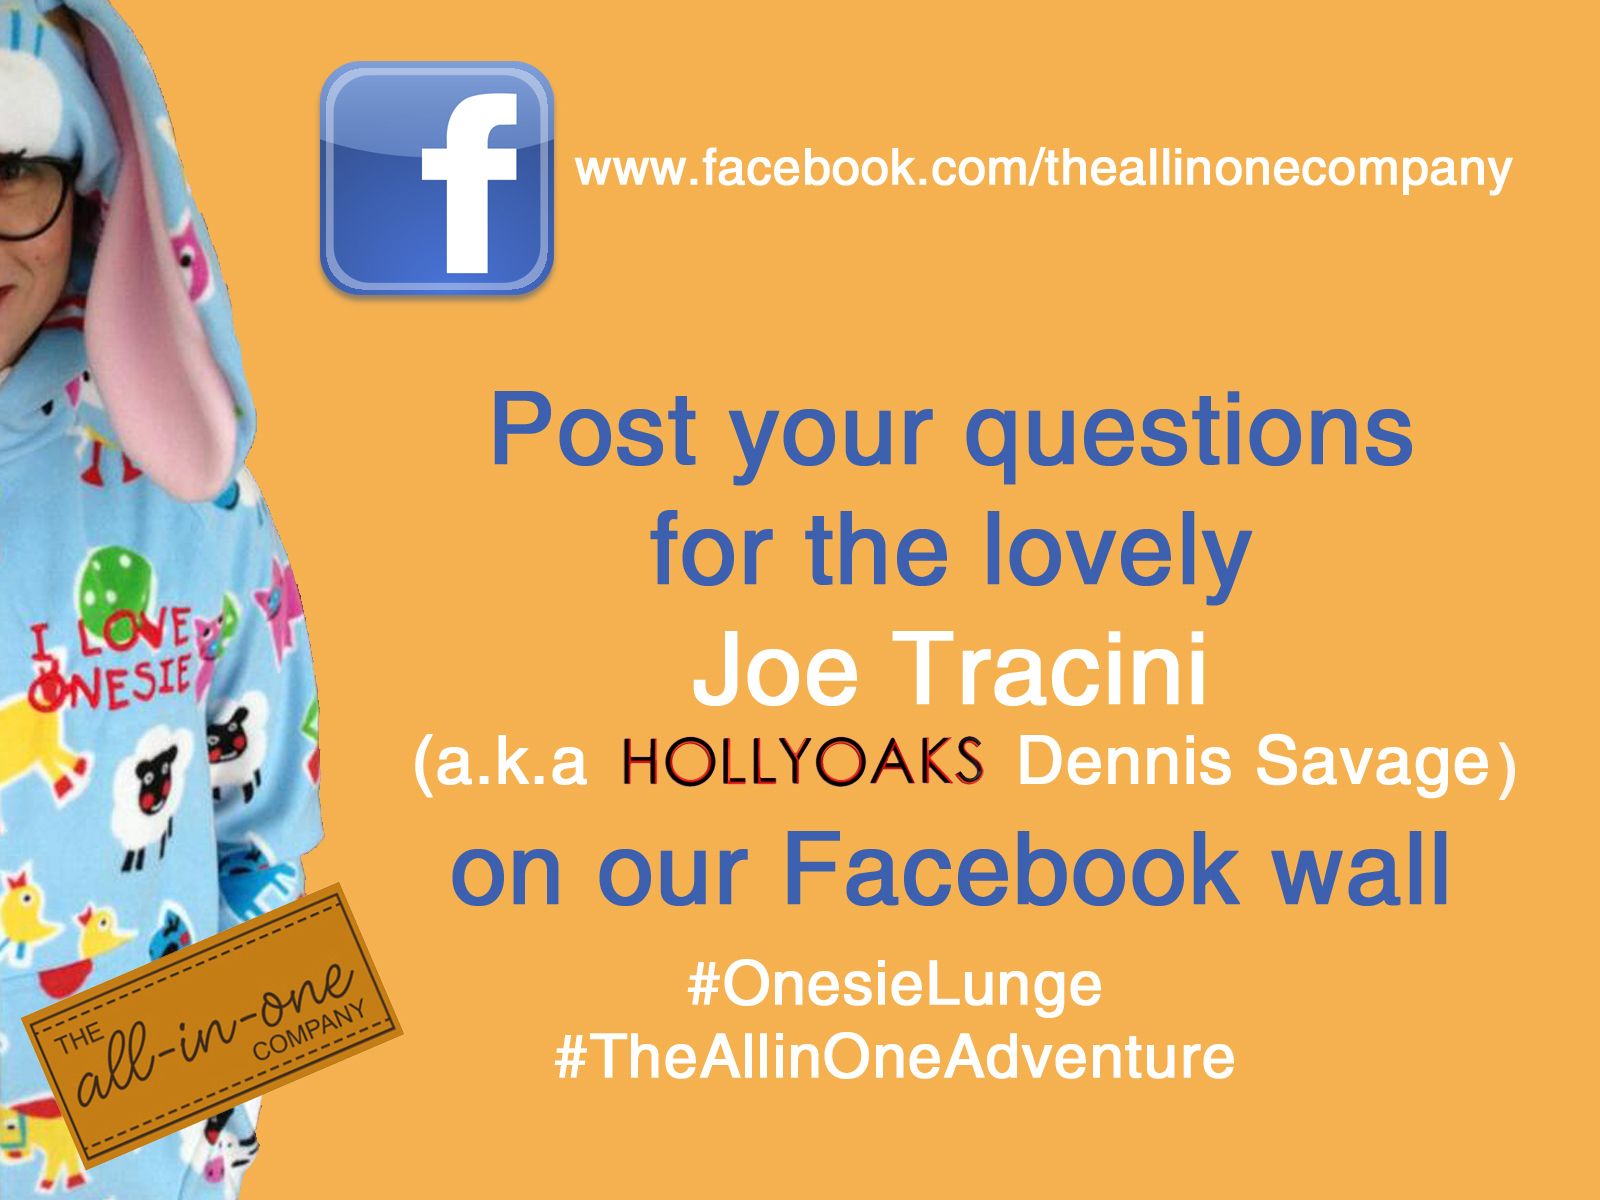 Onesie Adventures: Post your questions to Facebook for Hollyoaks Joe Tracini